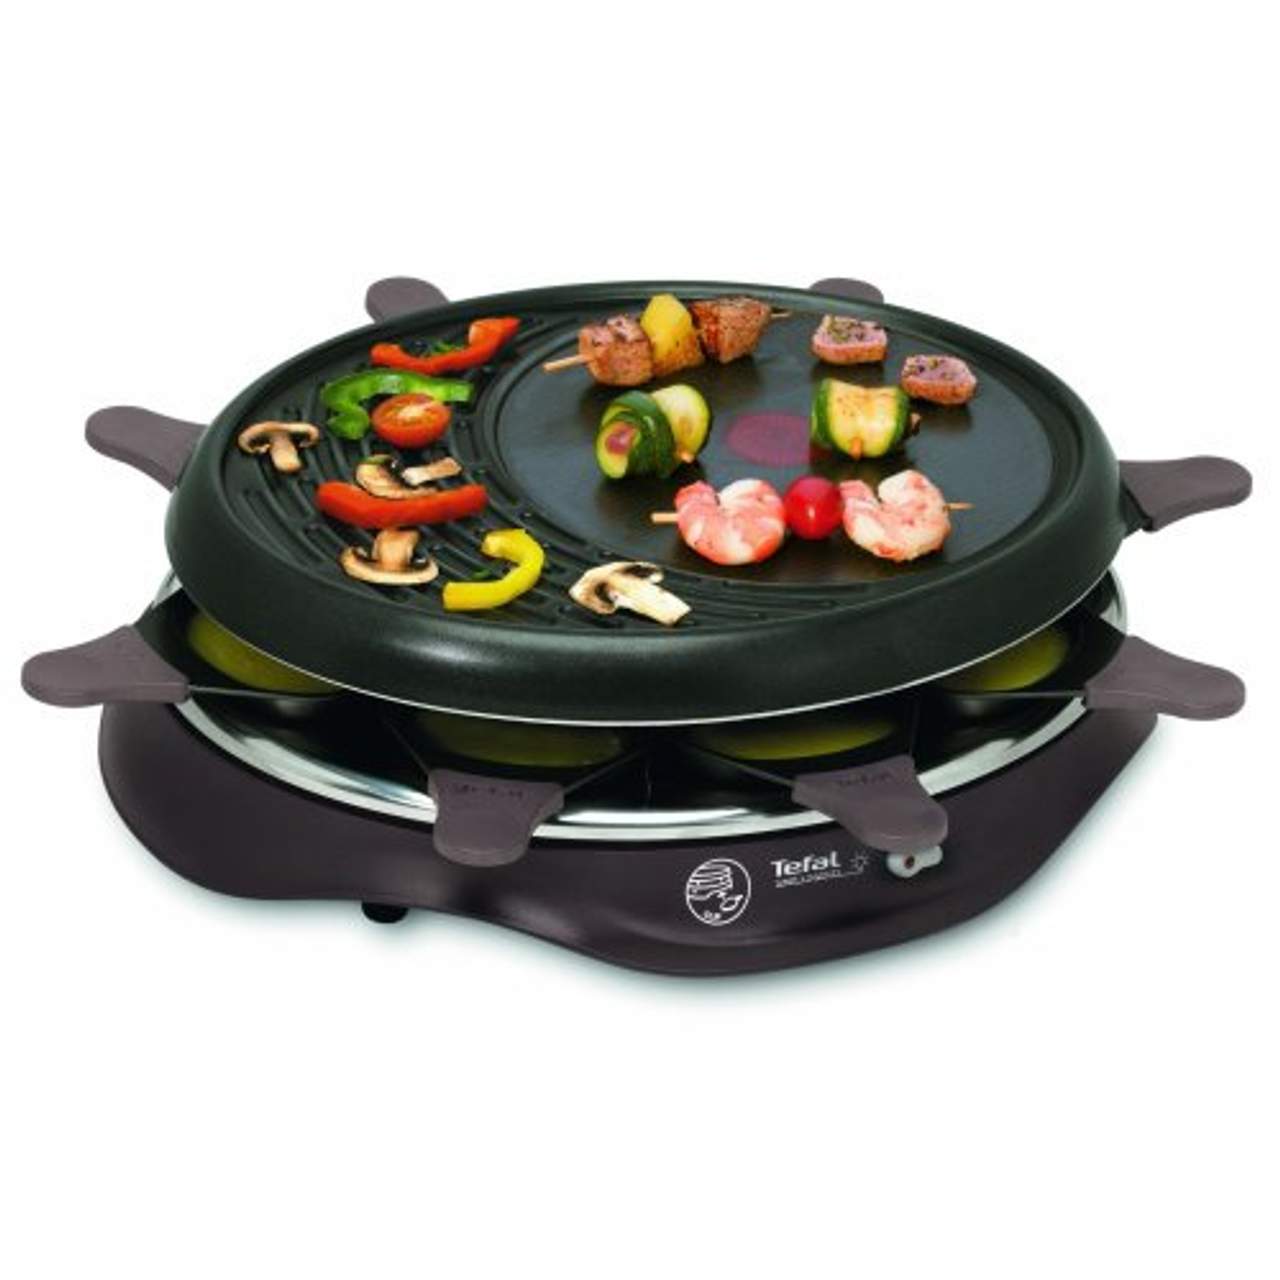 Tefal RE 5160 Raclette Simply Invents 8